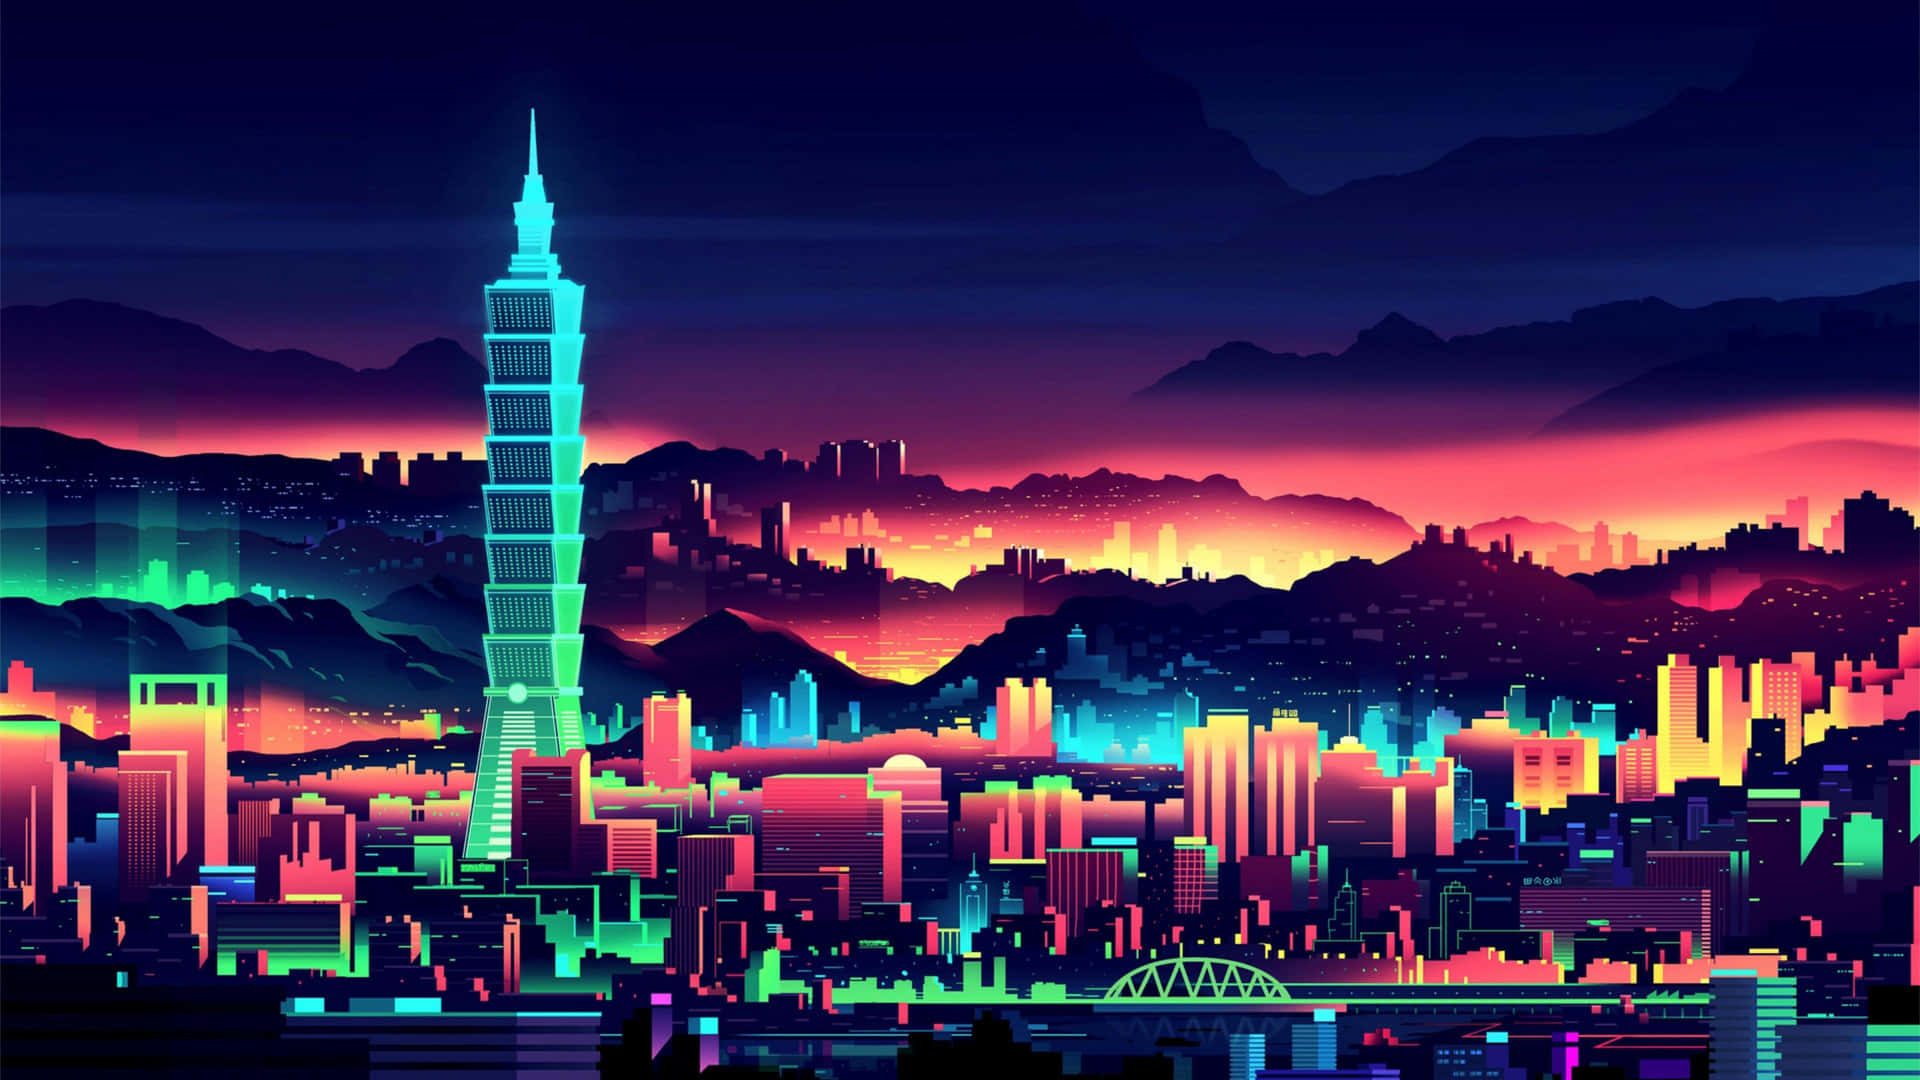 An illuminated cityscape with vibrant bursts of color Wallpaper